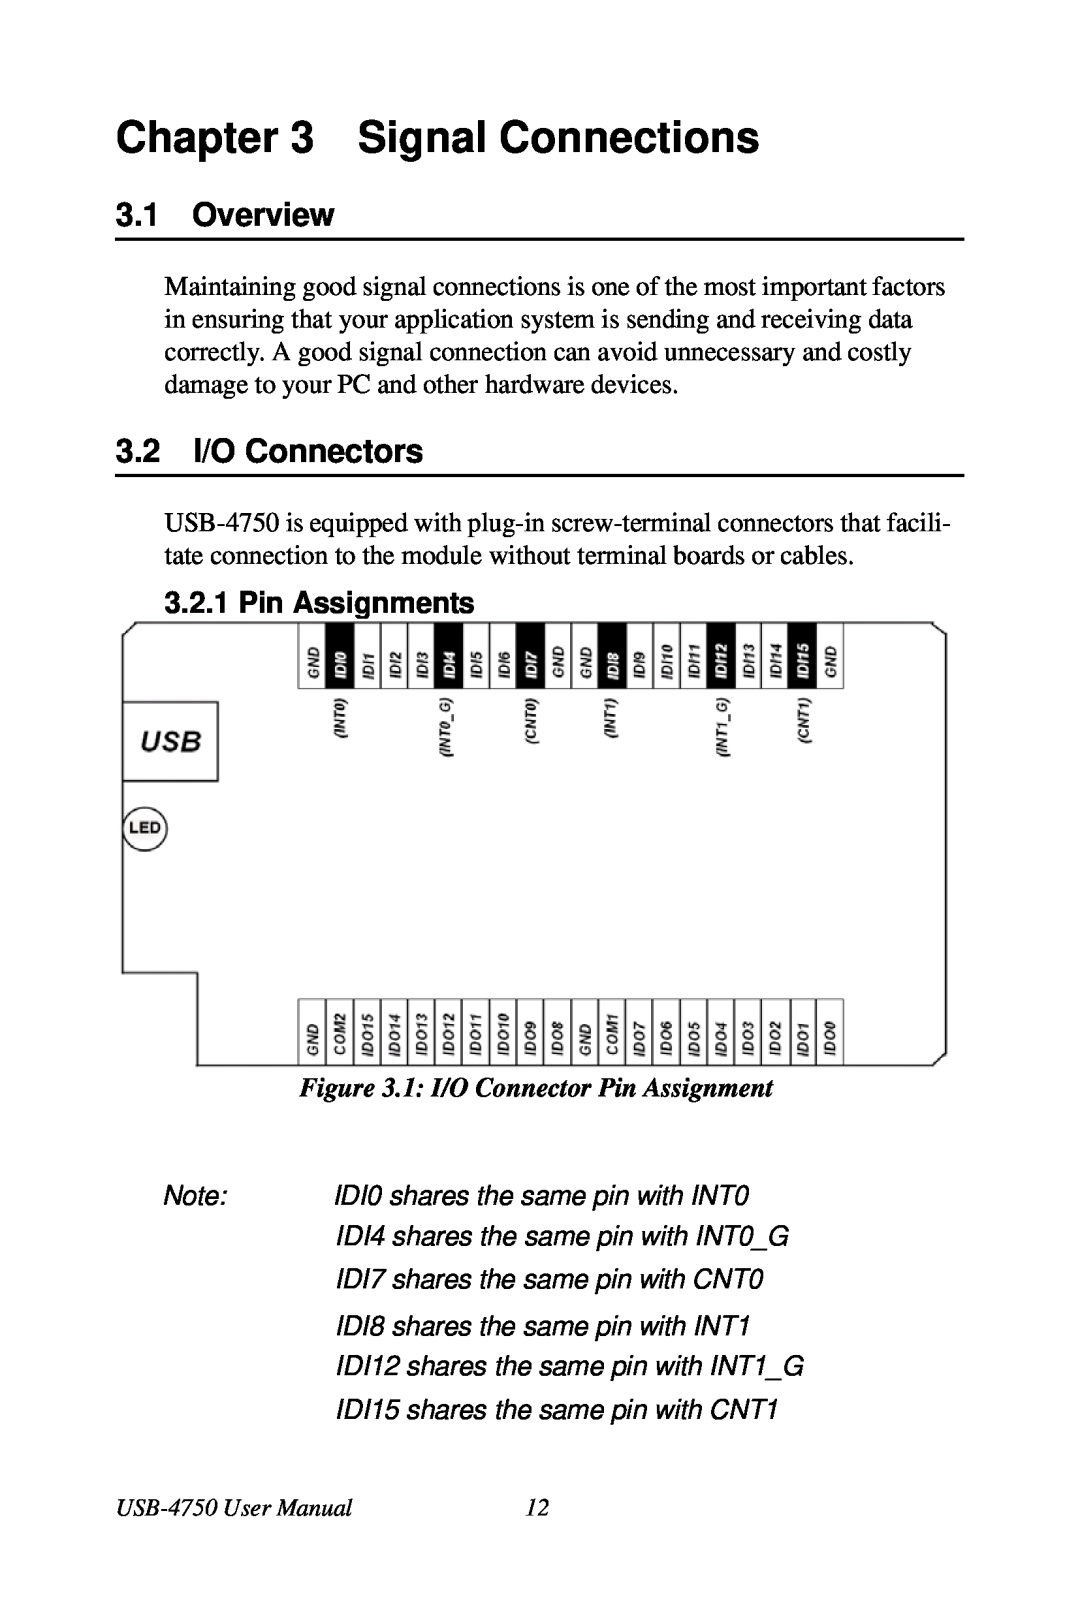 Omega USB-4750 manual Signal Connections, Overview, 3.2 I/O Connectors, Pin Assignments, 1 I/O Connector Pin Assignment 